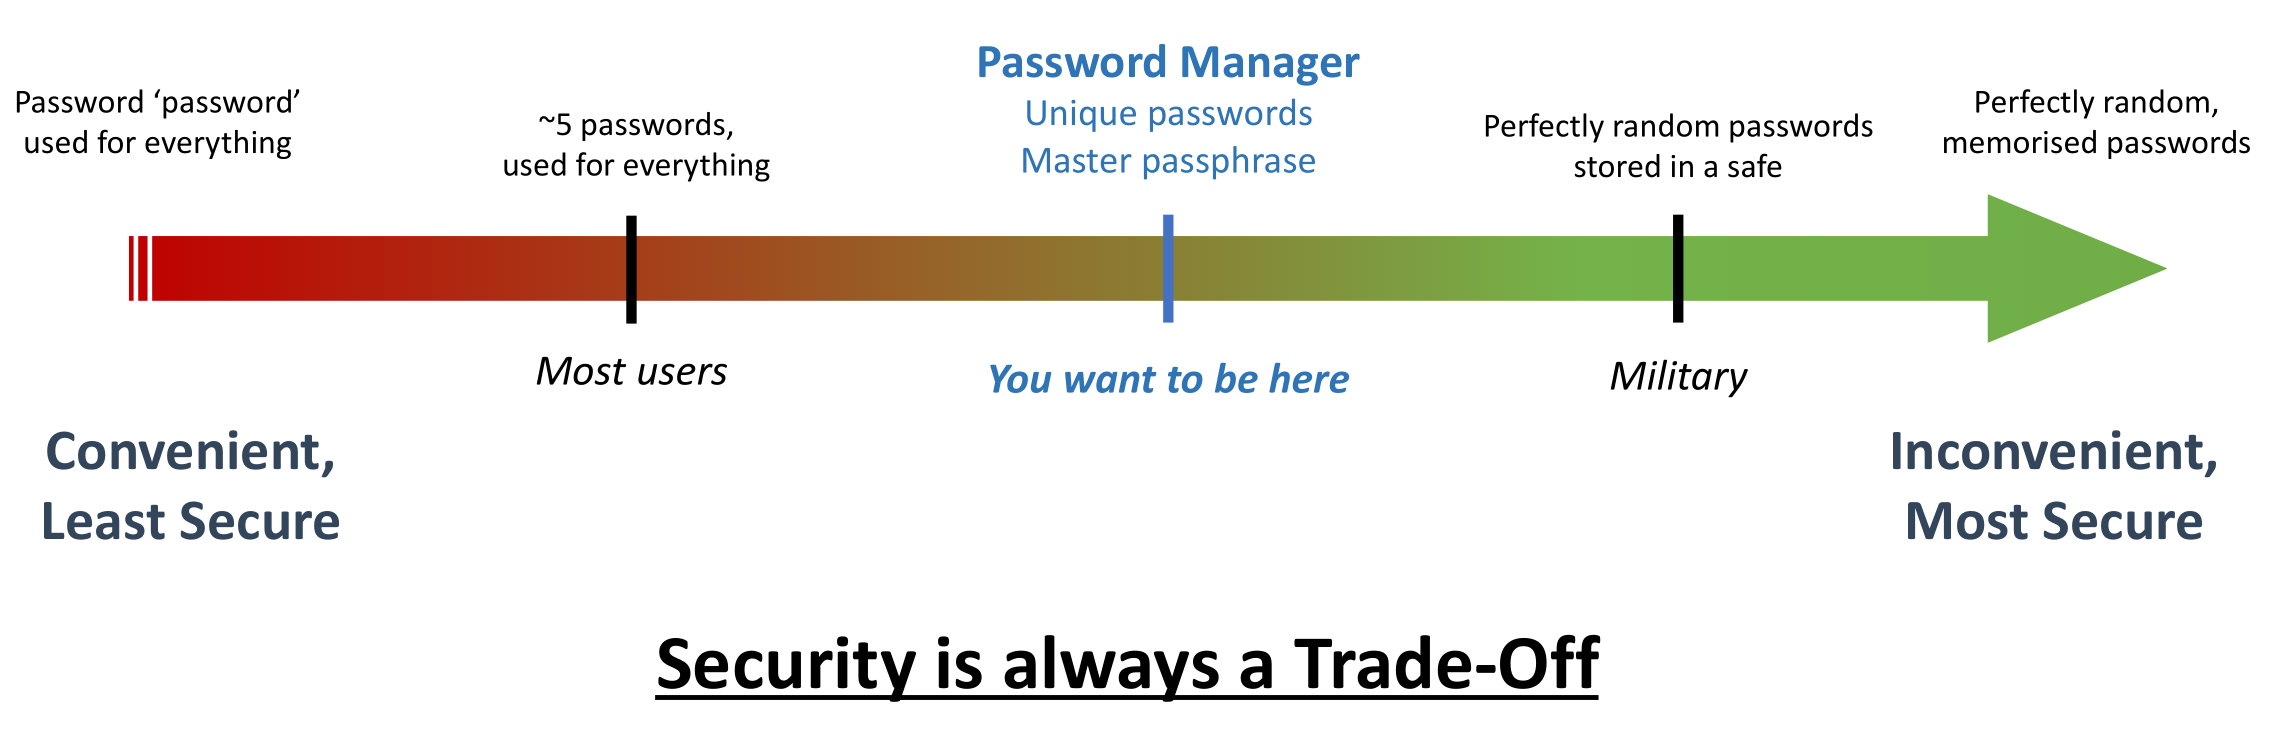 Security is always a trade-off